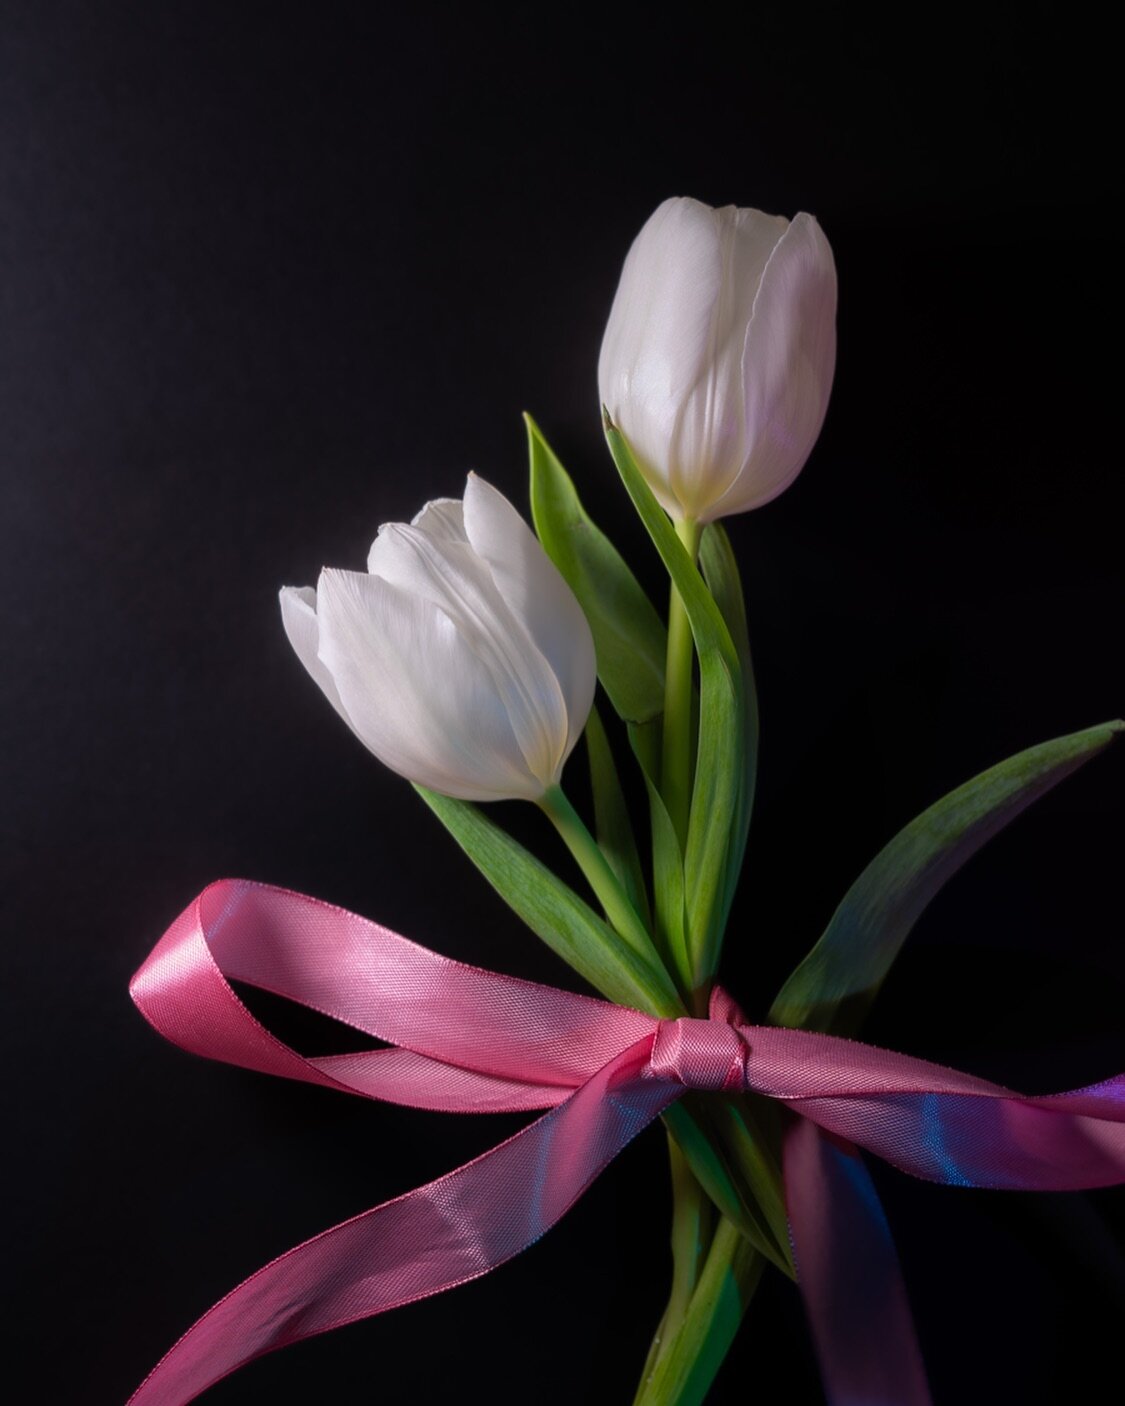 Had some beaut tulips in the little studio today, practicing that soft romantic lighting for some upcoming Valentines shoots 🥺

&bull;

#sonyalpha #edinburghphotography #edinburghphotographer #valentinesflowers #studiophotography #productphotography